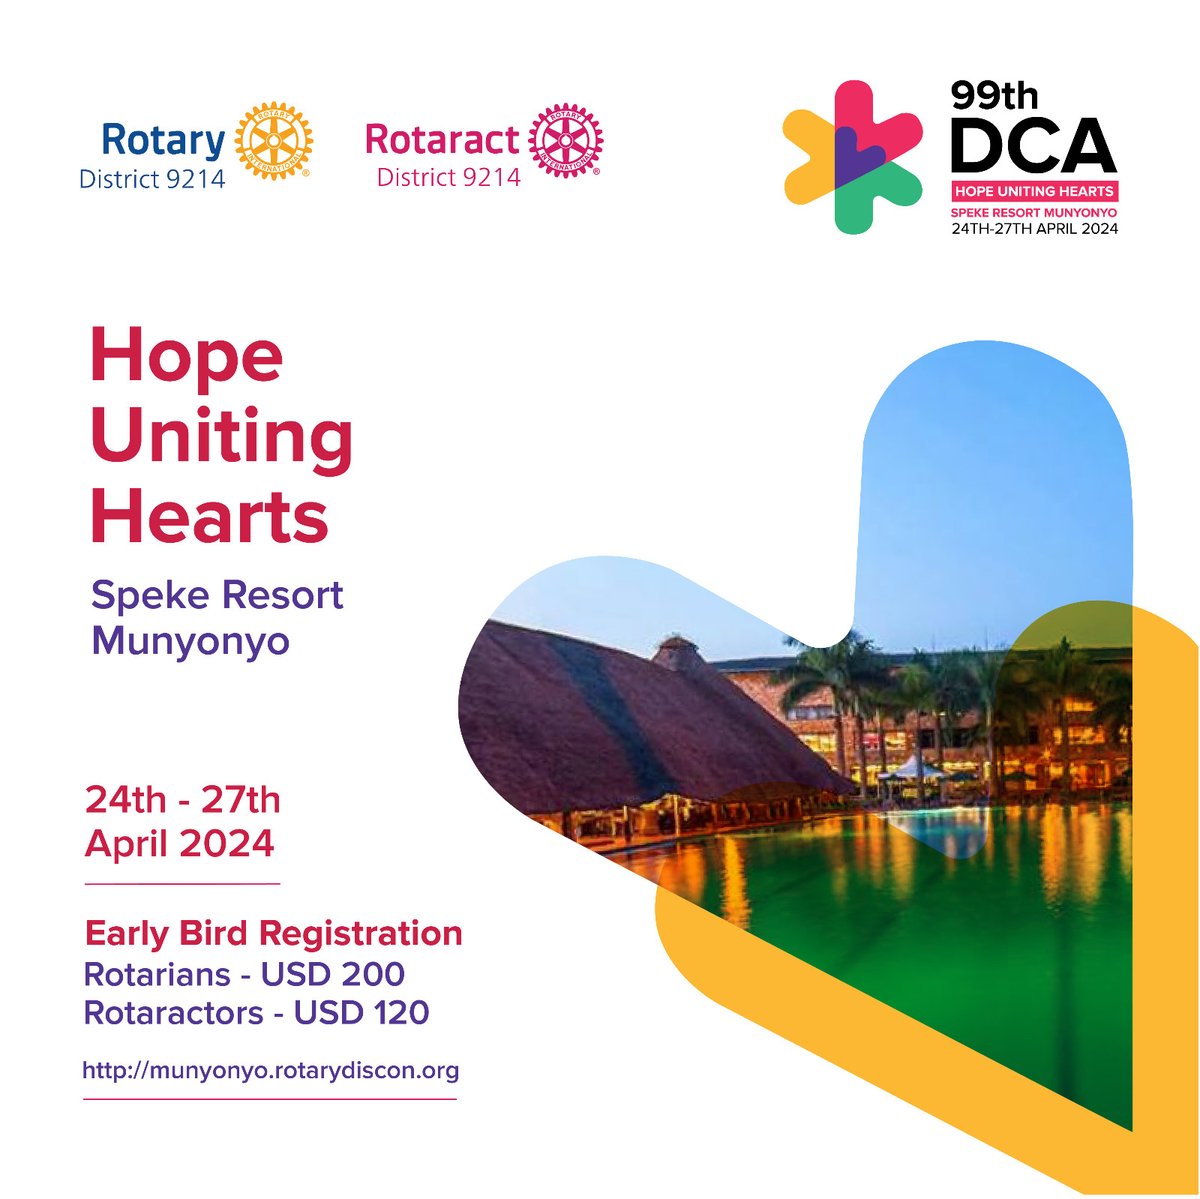 Today, our District Rotaract Representative, @PrincessPrude , alongside numerous Rotarians and Rotaractors, convenes at Speke Resort Munyonyo for the formal inauguration of the 99th District Conference Assembly (DCA) #99thDCA. The event's theme is 'Hope Uniting Hearts.' @99thDCA